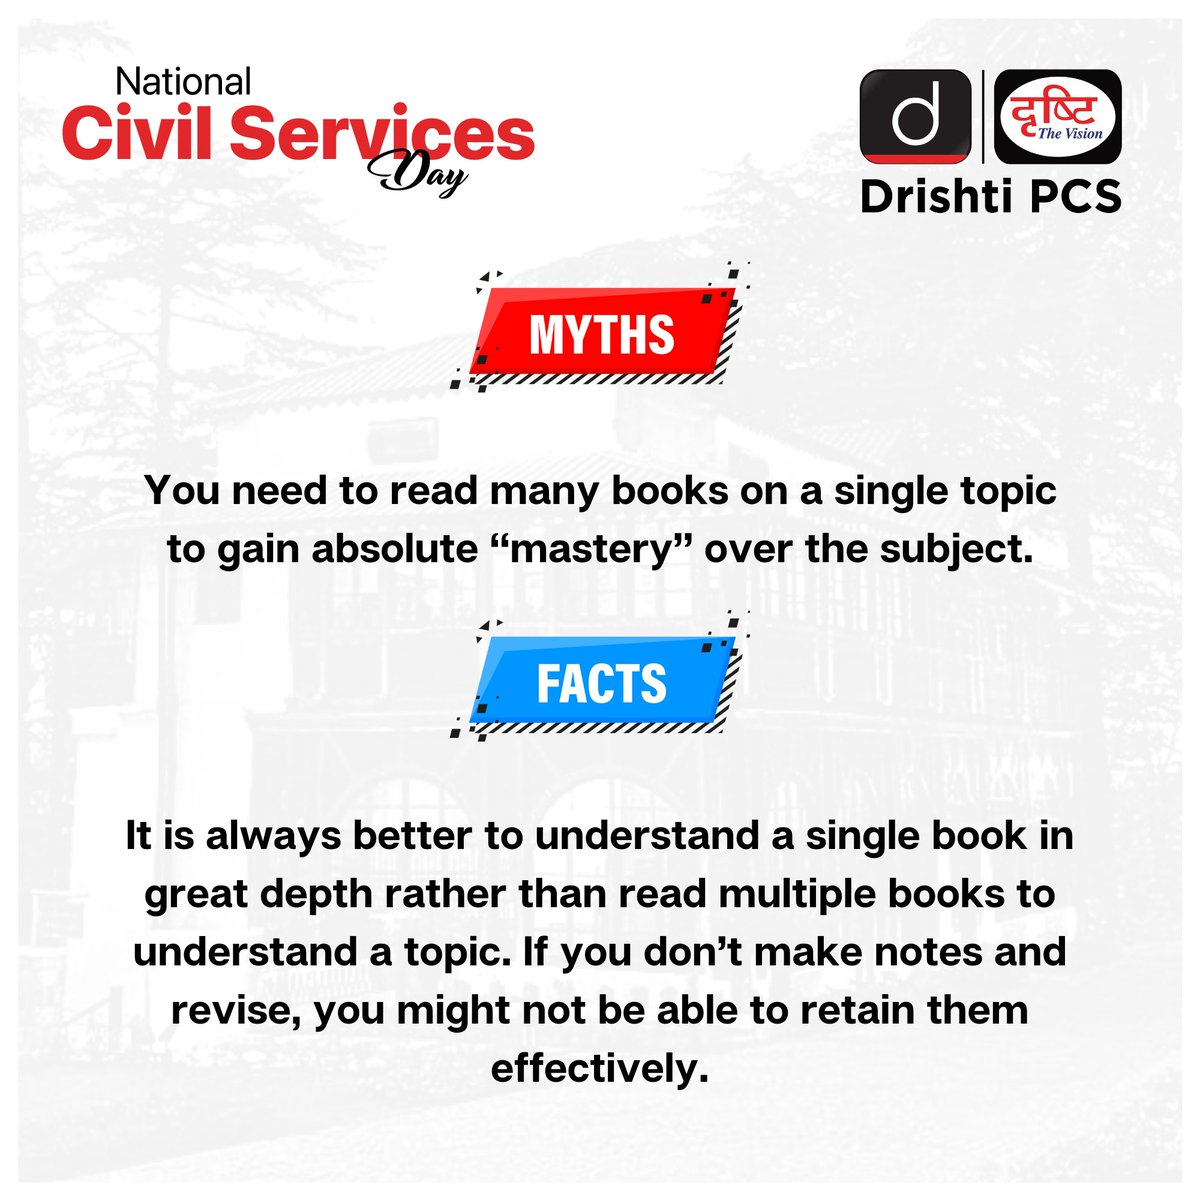 Celebrating National Civil Services Day by Debunking Myths and Revealing Facts.

#CivilServicesDay #MythsVsFacts #National #ServiceDay #JaiHind #UPSC #SardarVallabhBhaiPatel #PublicServices #SteelFrameOfIndia #LBSNAA #UPSC2024 #India #DrishtiIAS